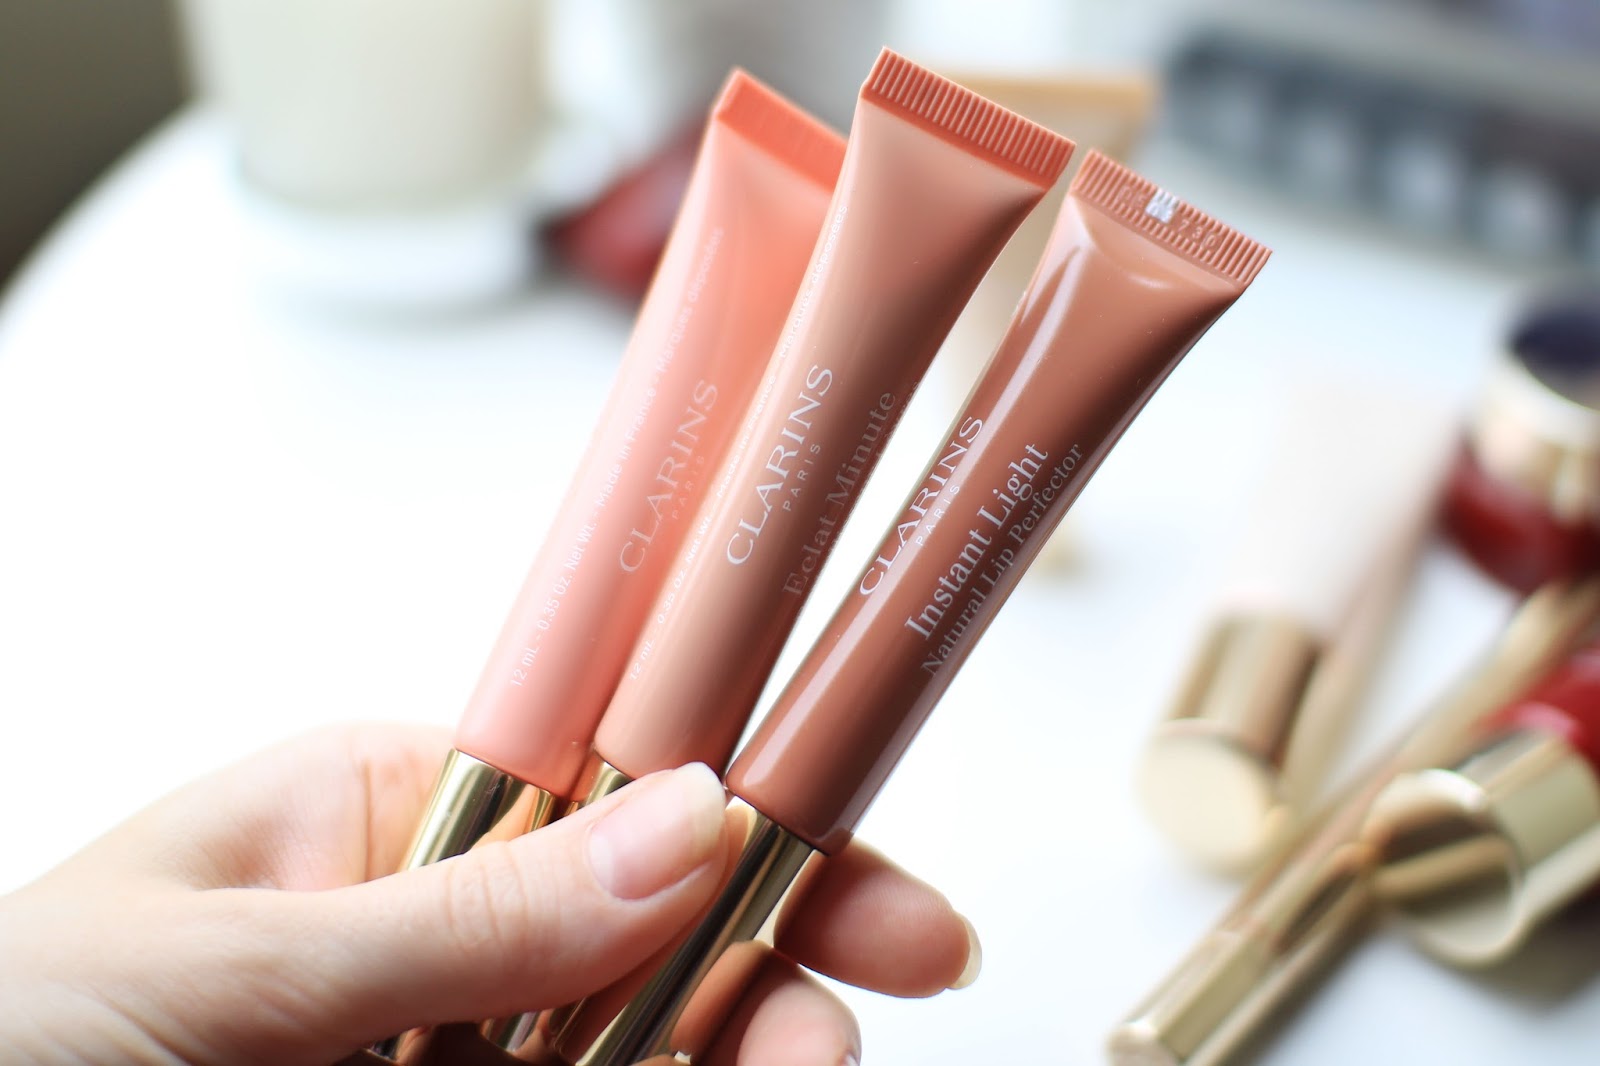 Instant light lip perfectors from Clarins